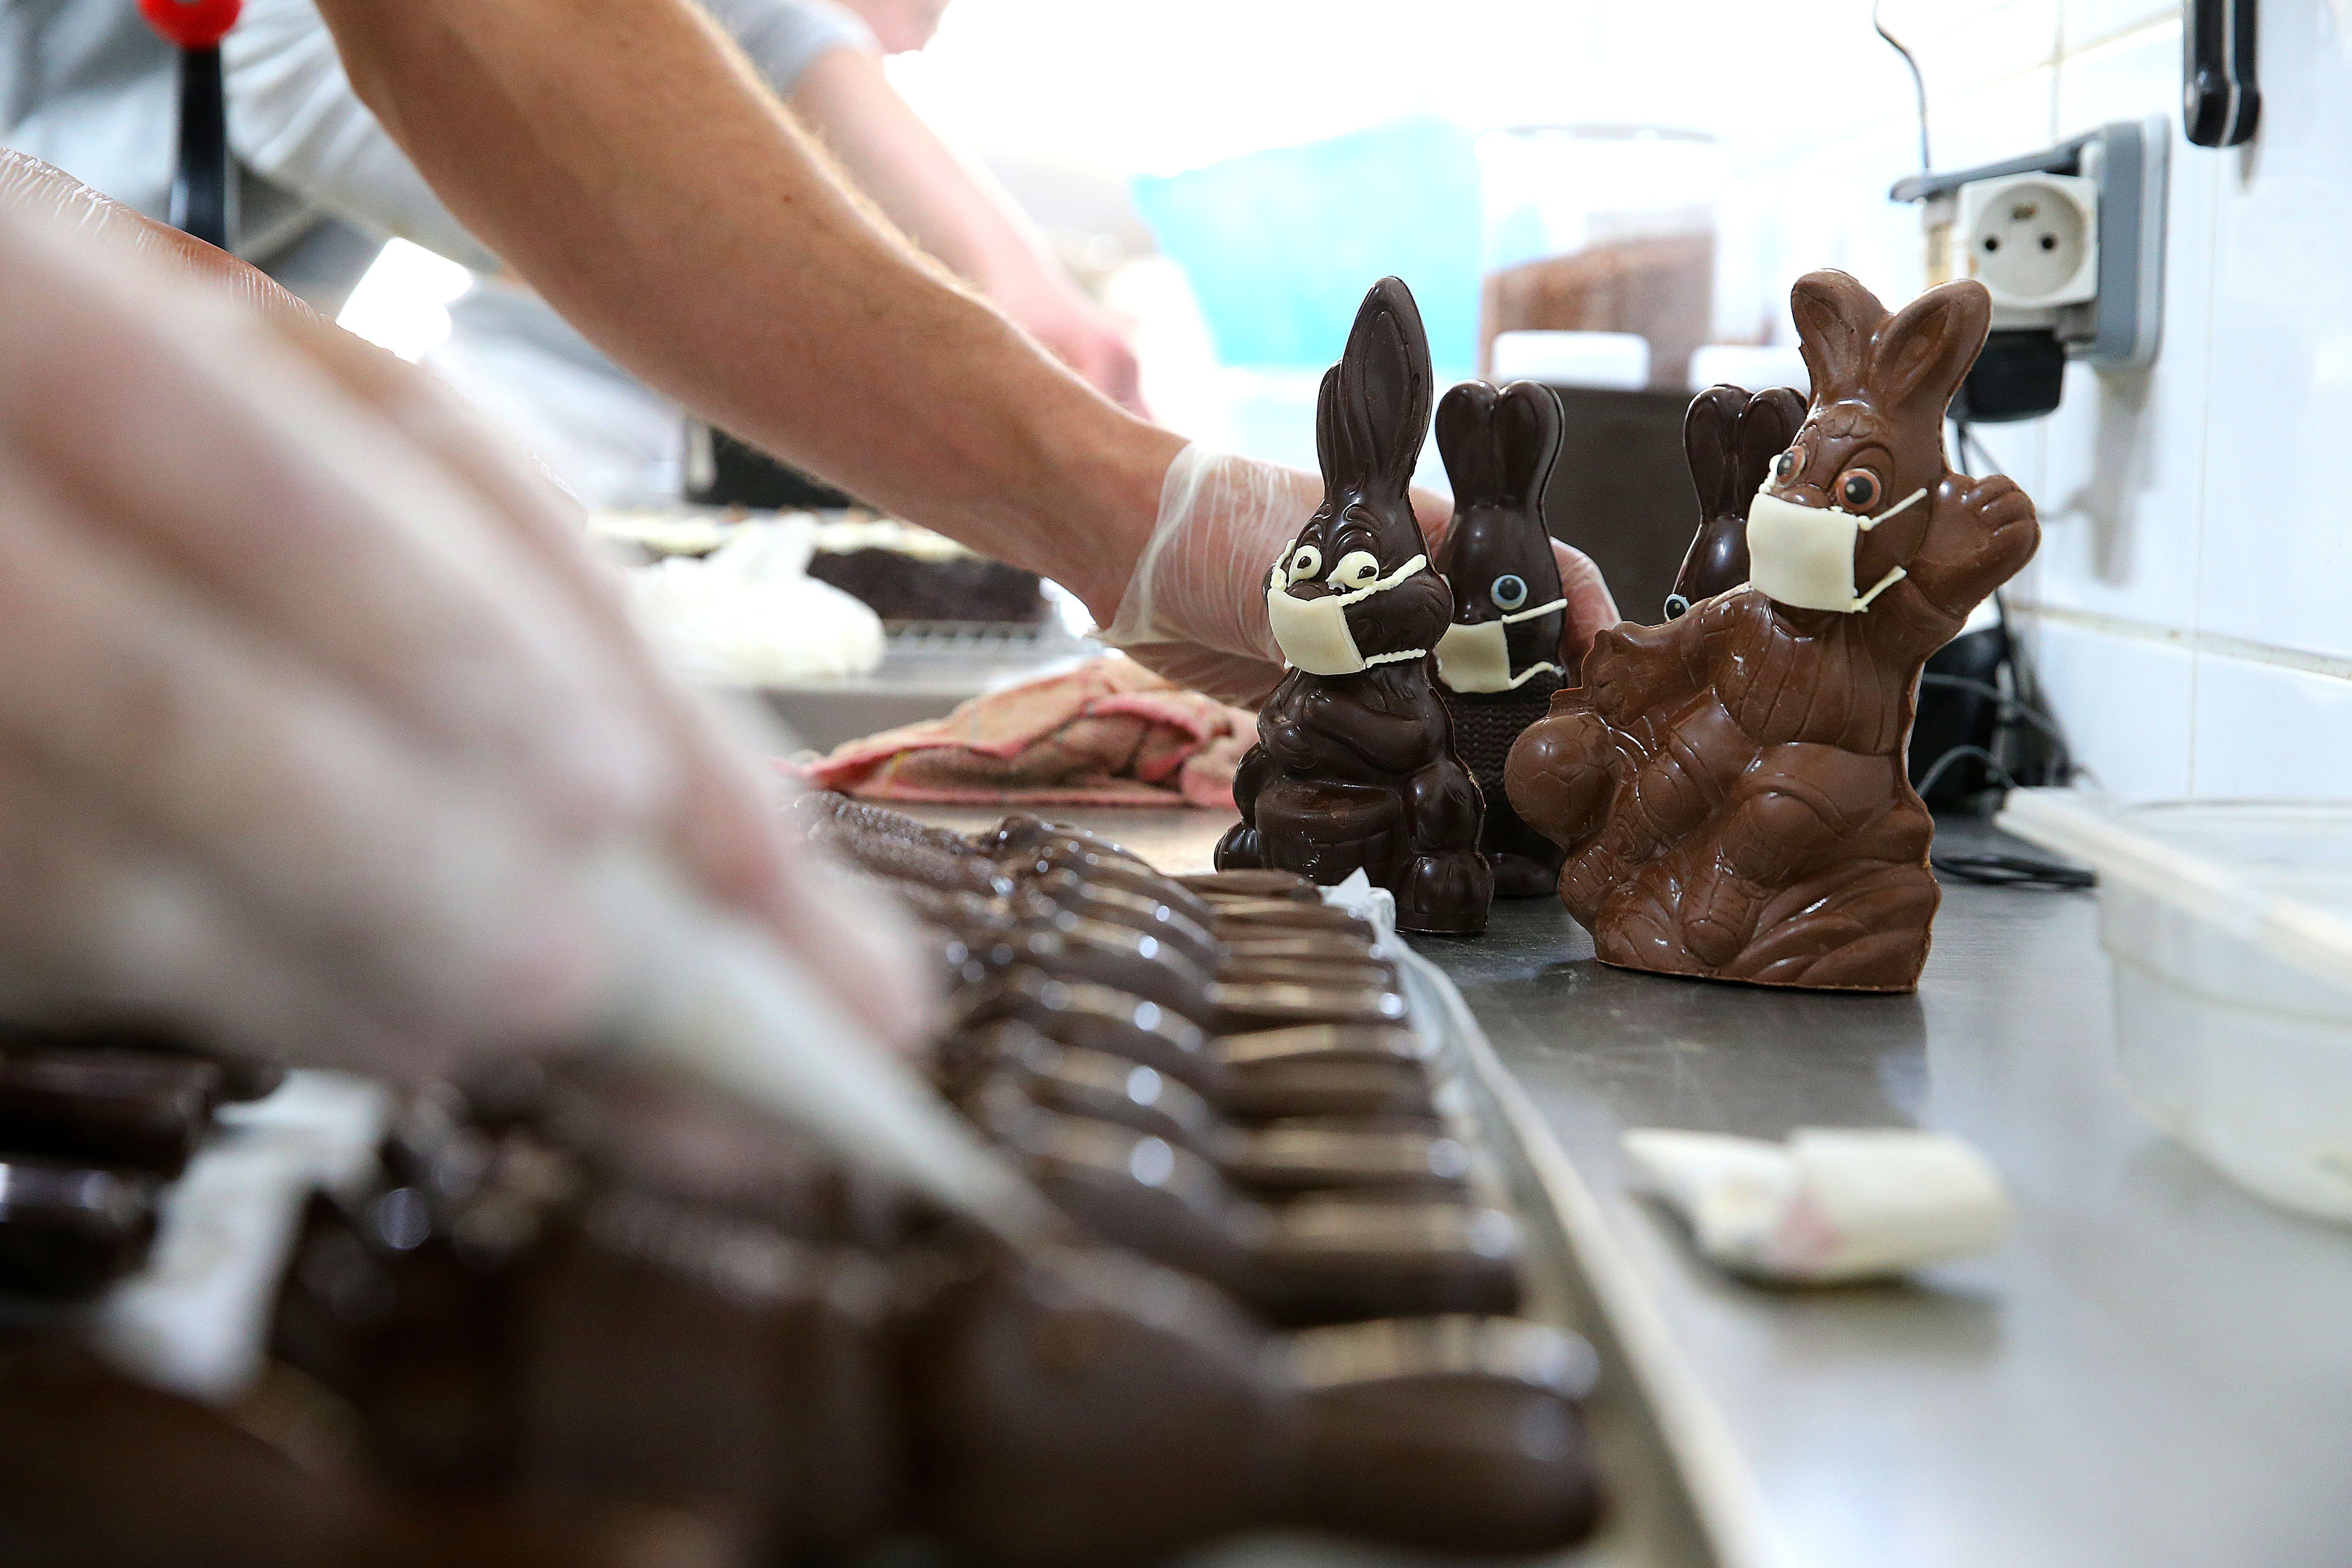 In this image, chocolate bunnies wear face masks